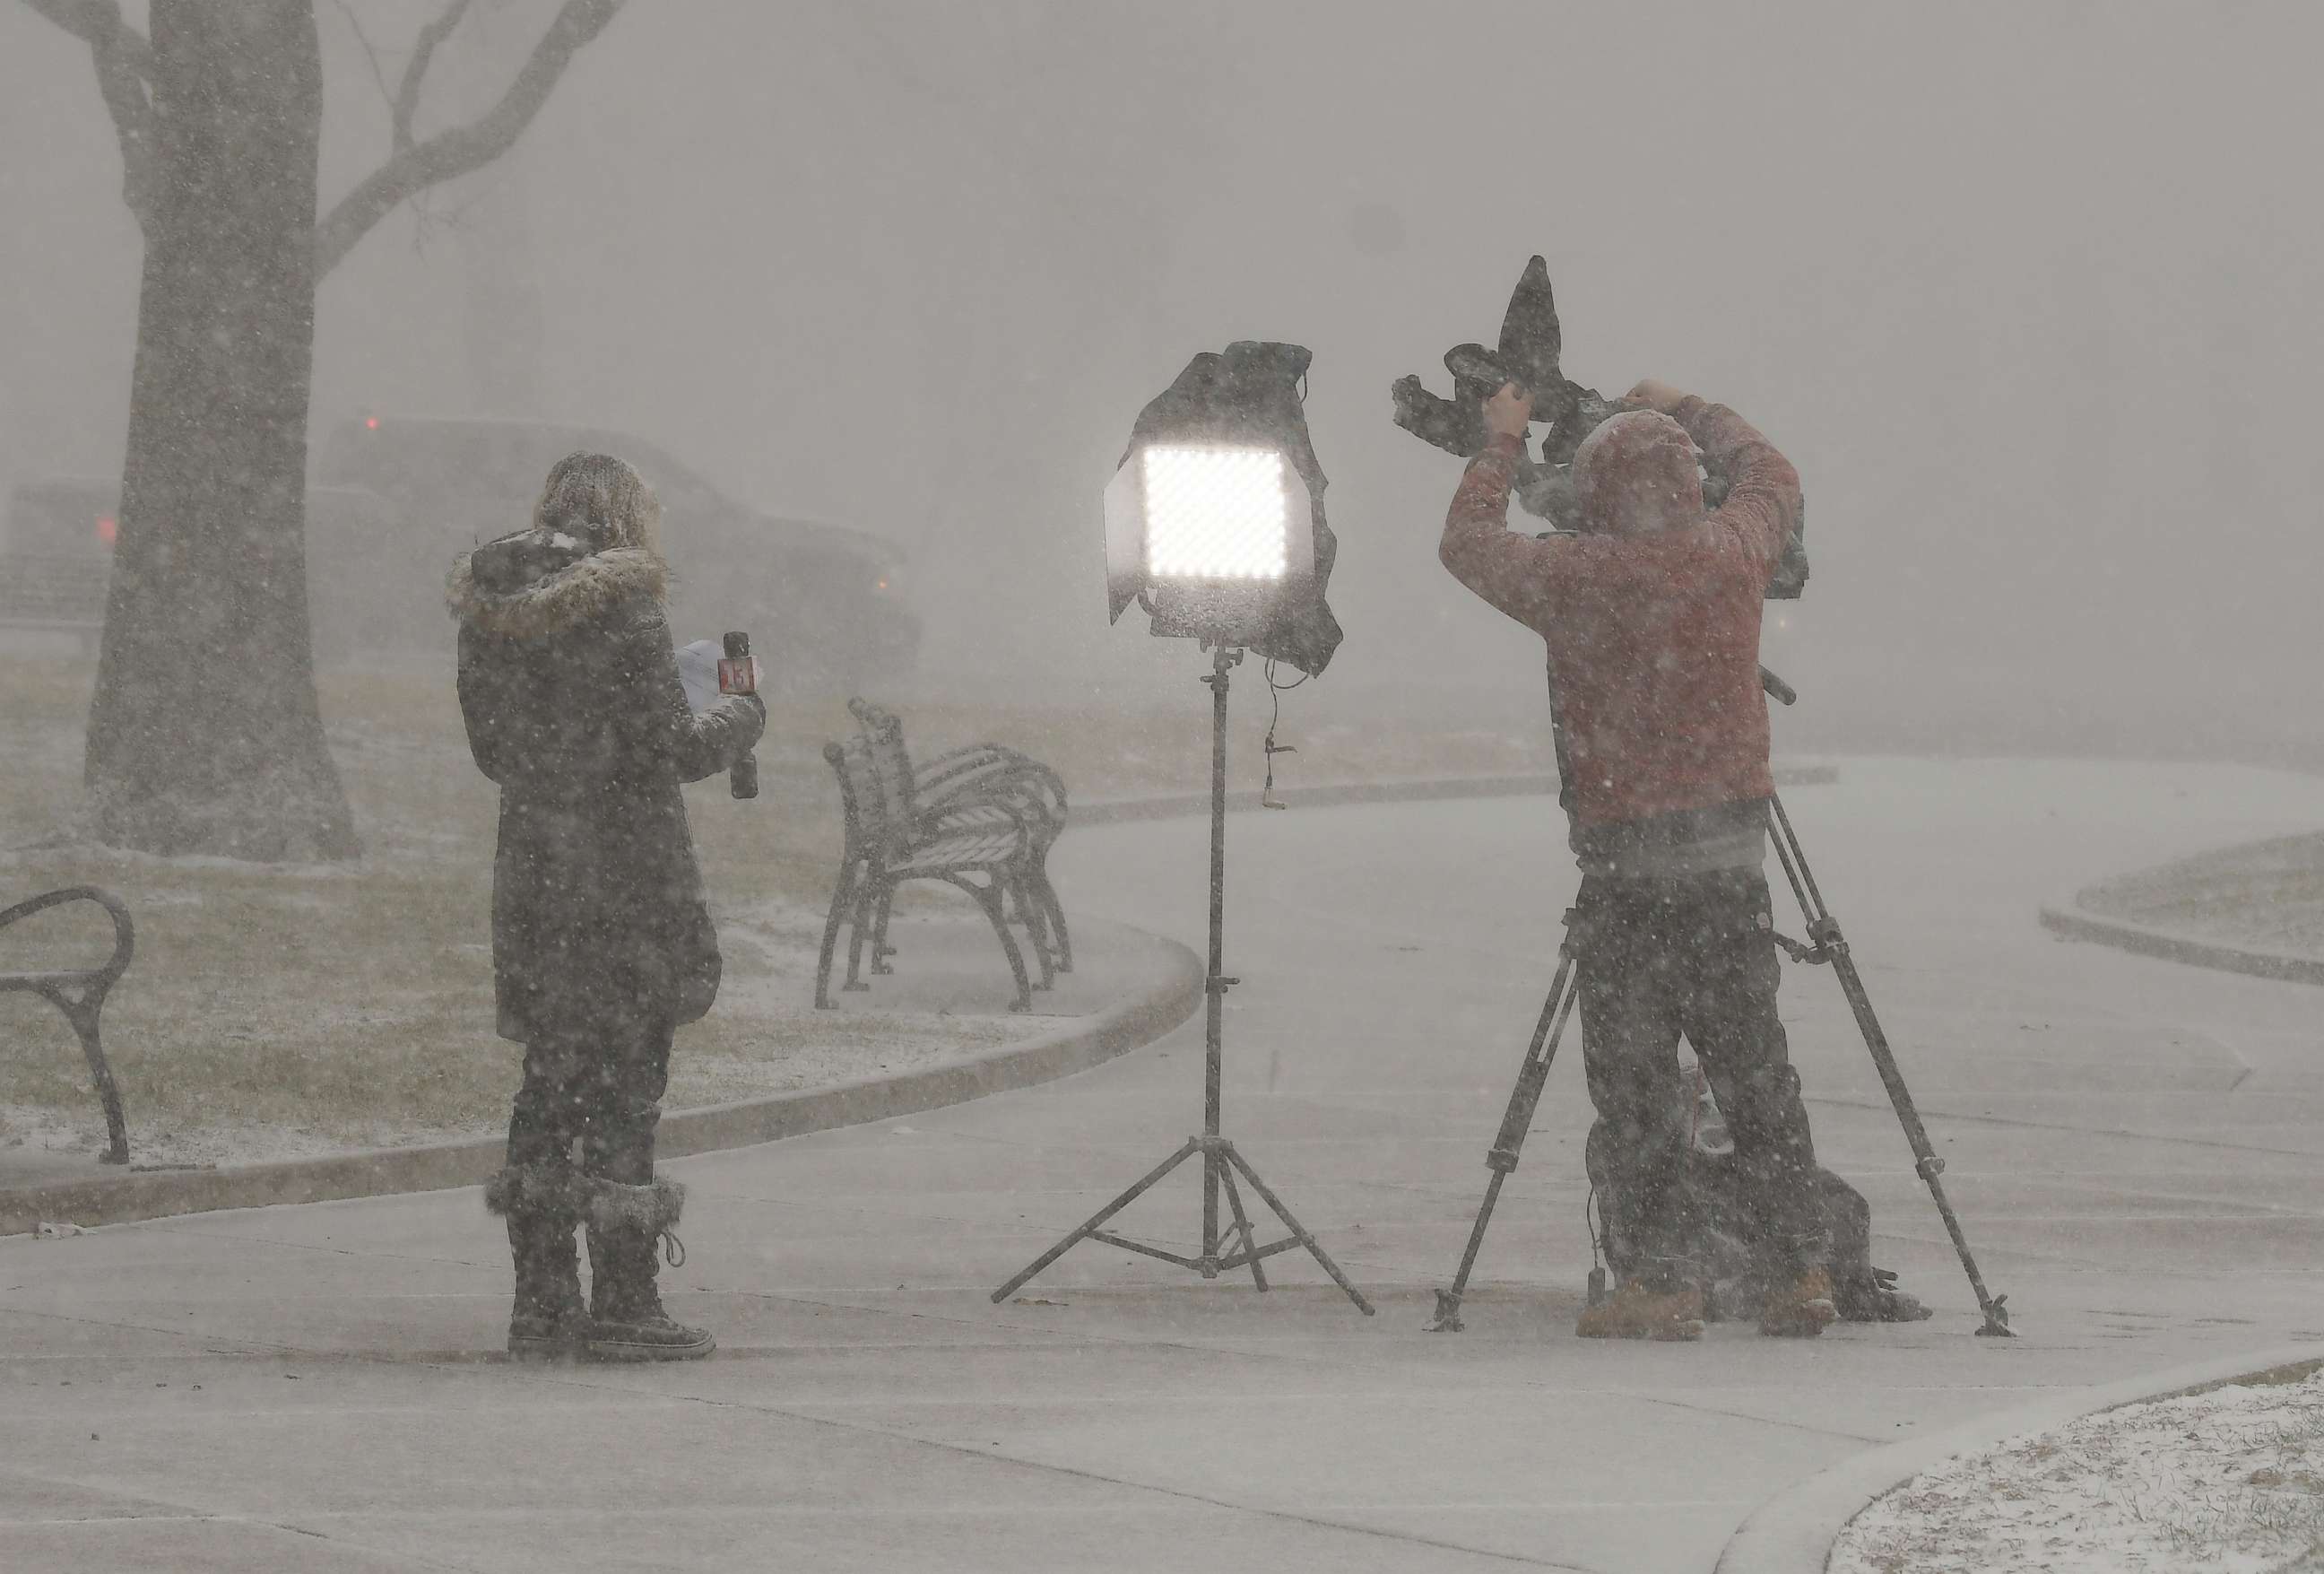 PHOTO: Reporters produce a television report in a snow squall outside the New York state Capitol, Wednesday, Jan. 20, 2021, in Albany, N.Y. Joe Biden was inaugurated as President on Wednesday in Washington.